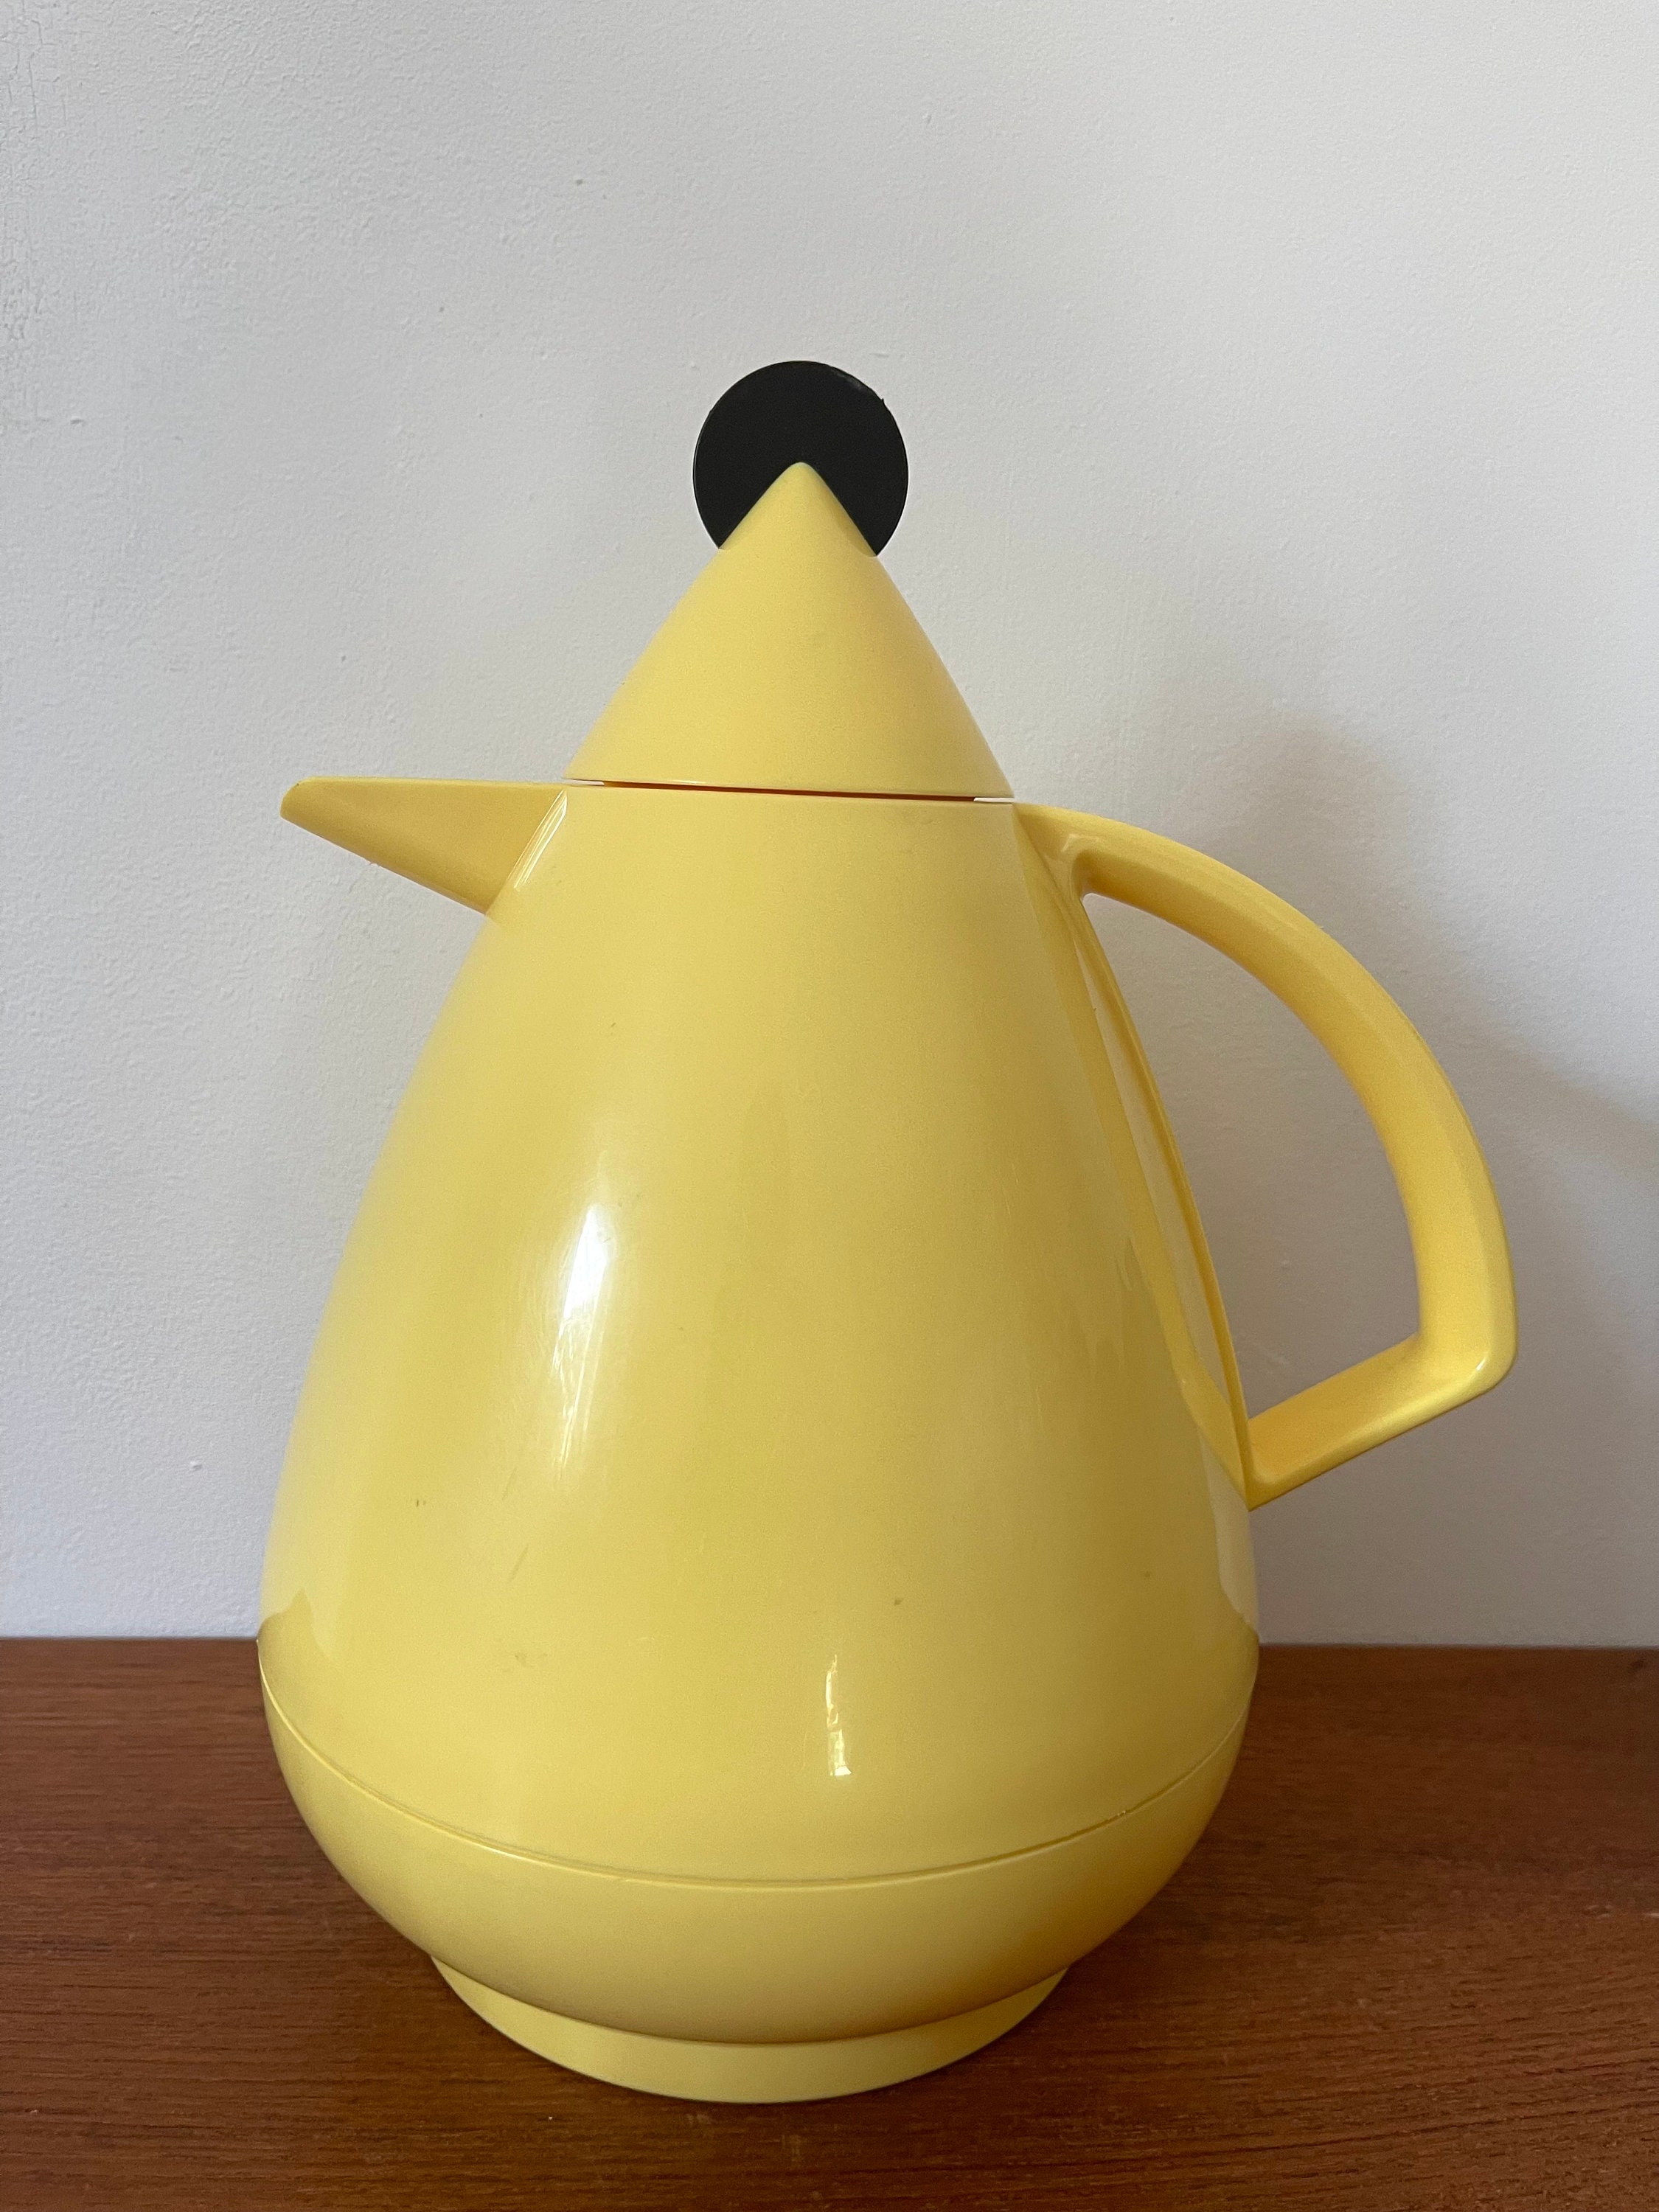 1990s unused with labels Hans Slany design insulated thermal teapot.  Galileo by Leifheit Germany - Memphis style